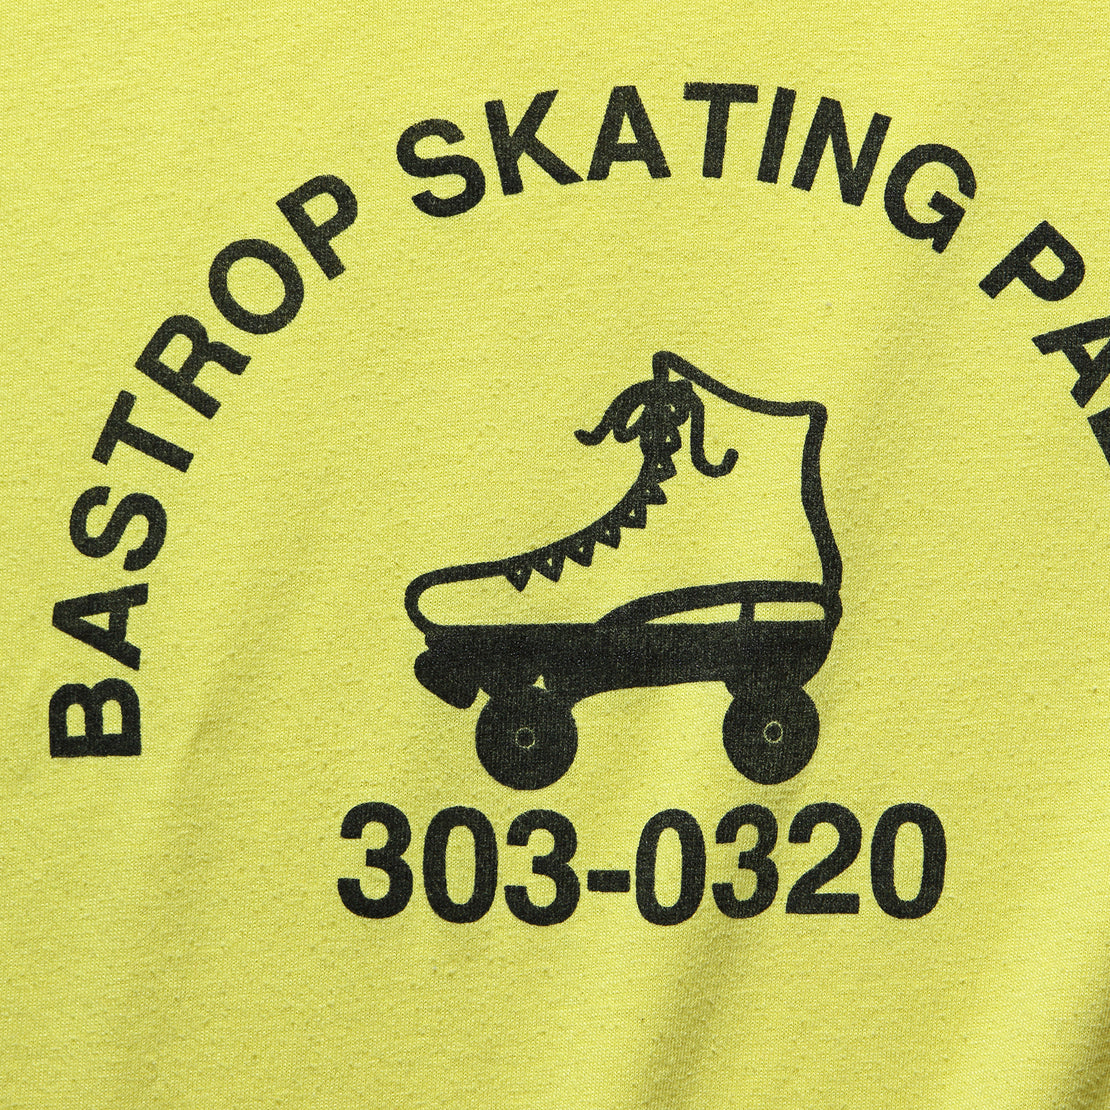 Bastrop Skating Palace T-Shirt - Yellow - Vintage - STAG Provisions - W - One & Done - Apparel